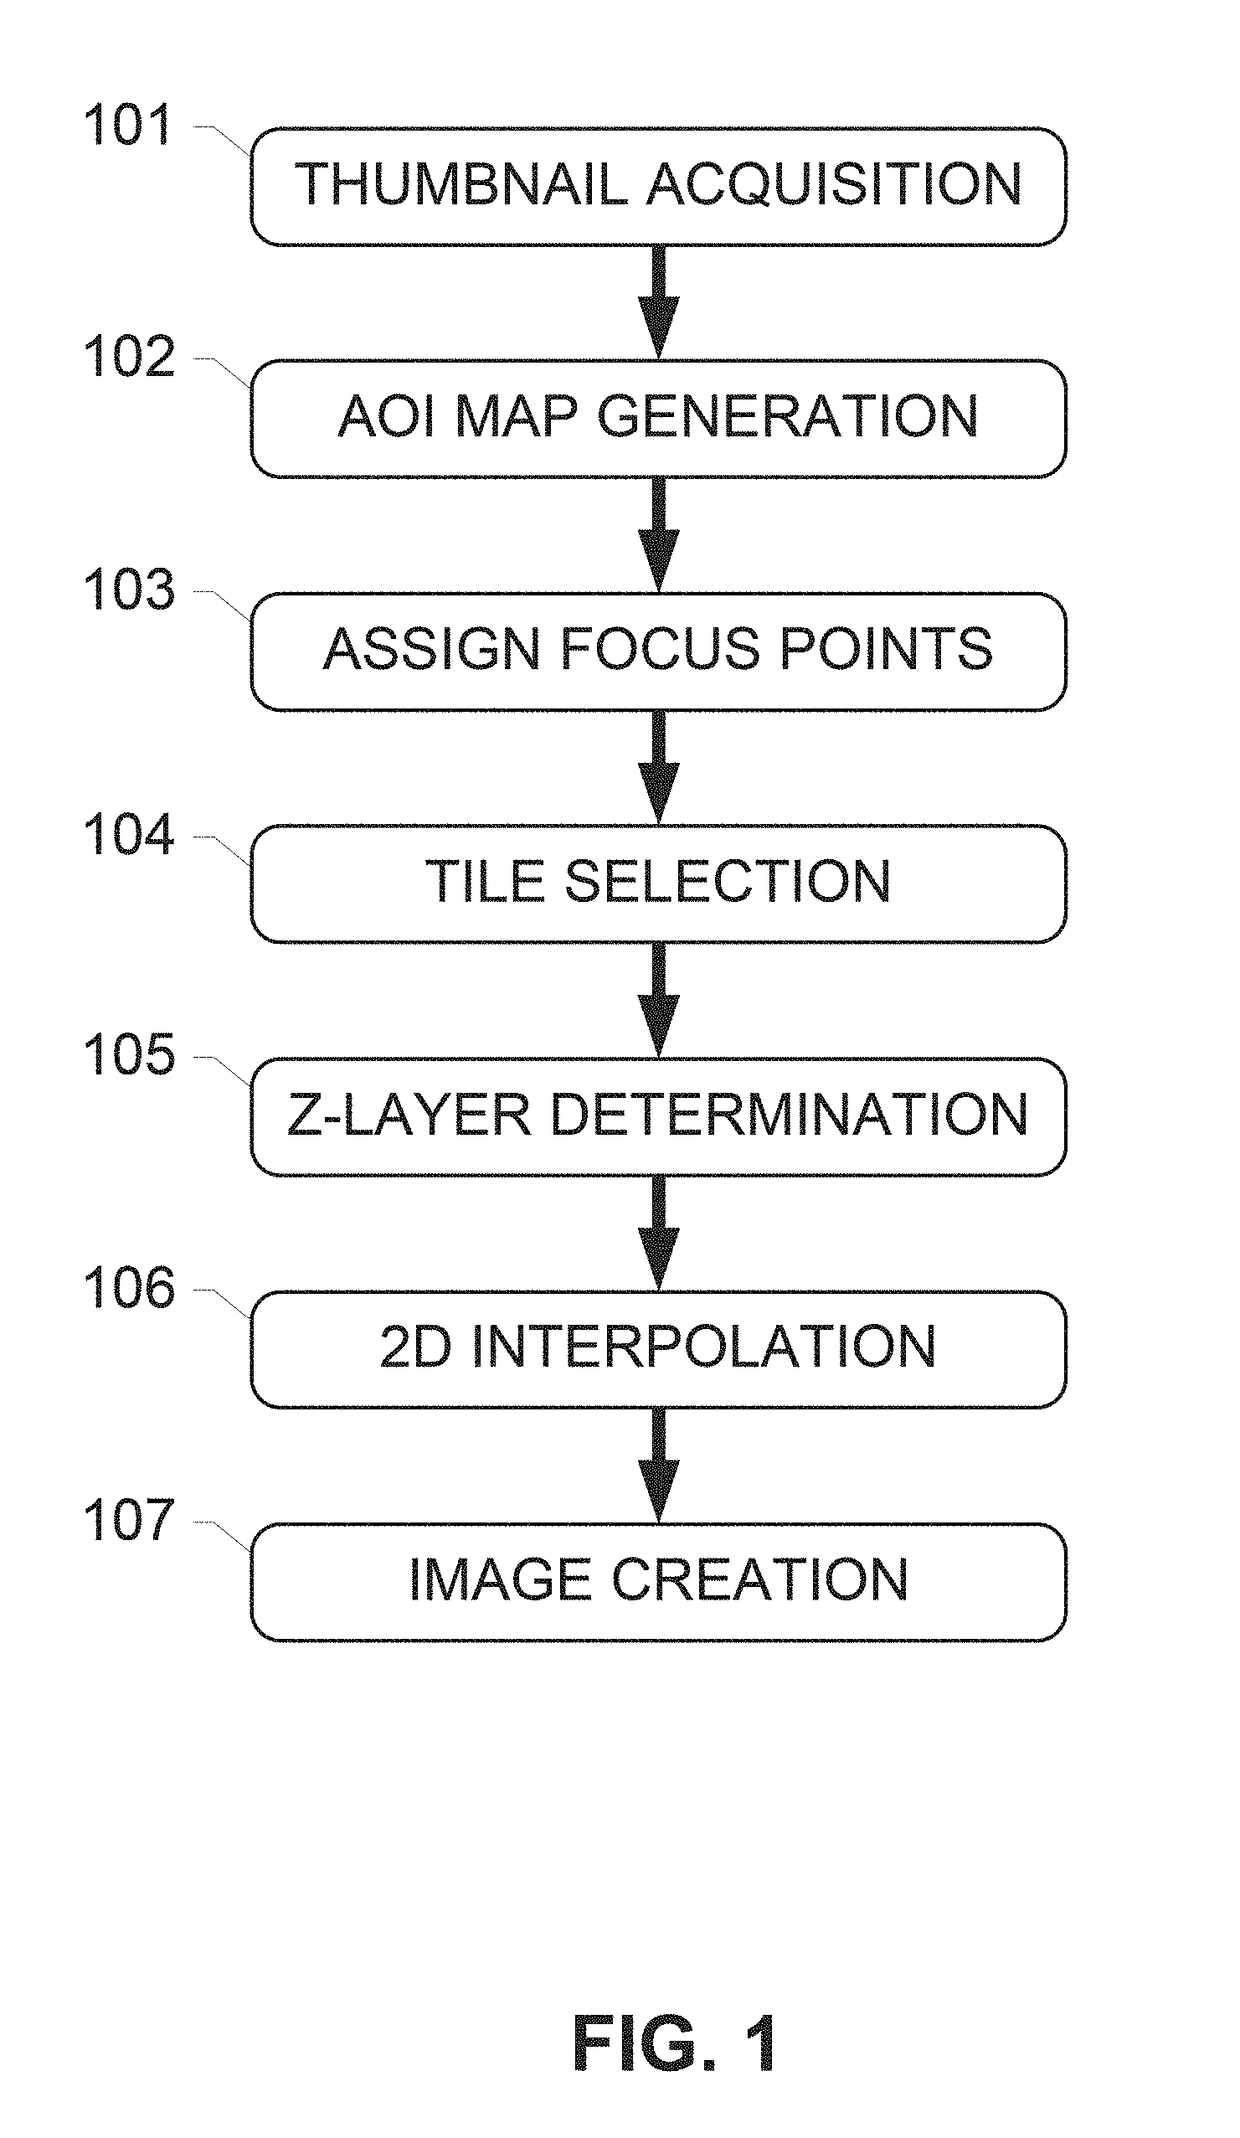 Systems and methods for area-of-interest detection using slide thumbnail images